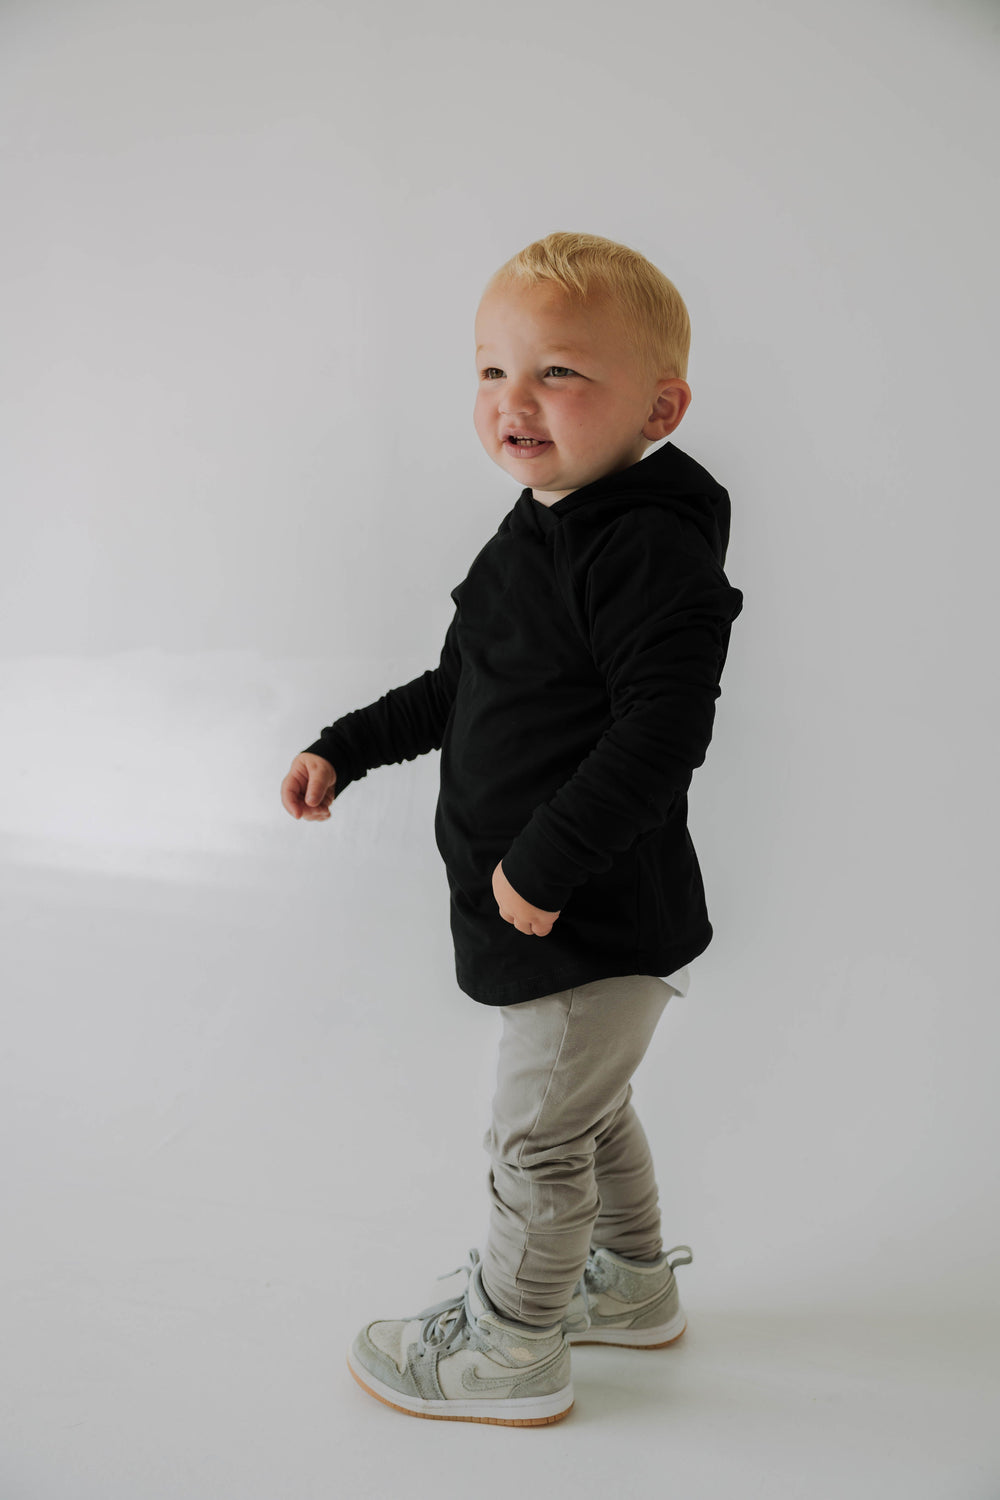 All Clothing – Channing Baby & Co.